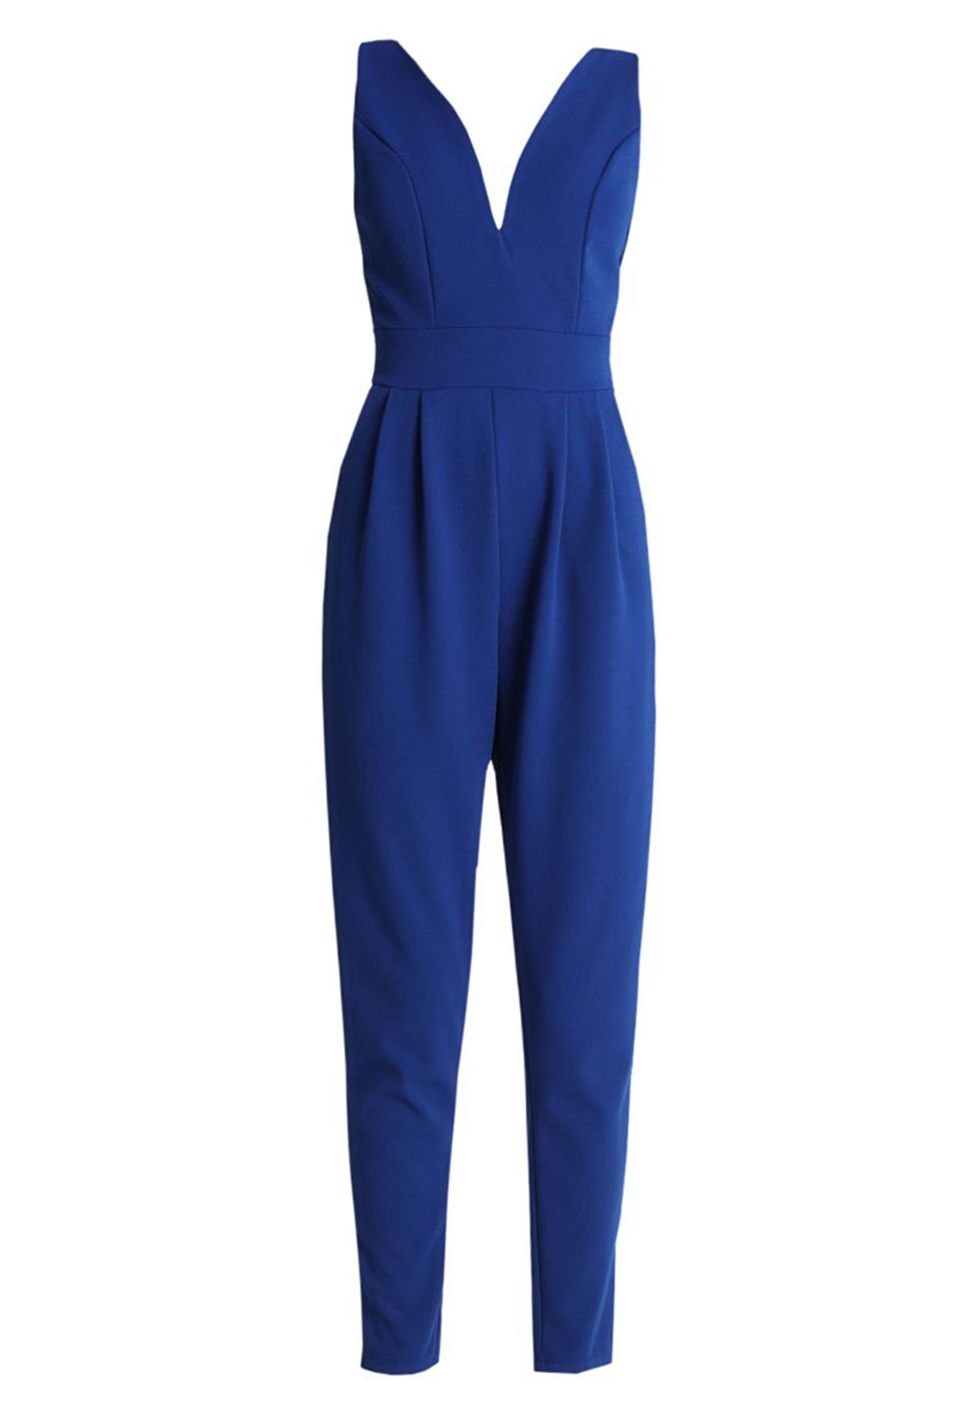 Clothing, Cobalt blue, Blue, Overall, Electric blue, Turquoise, One-piece garment, Dress, Sleeve, Trousers, 